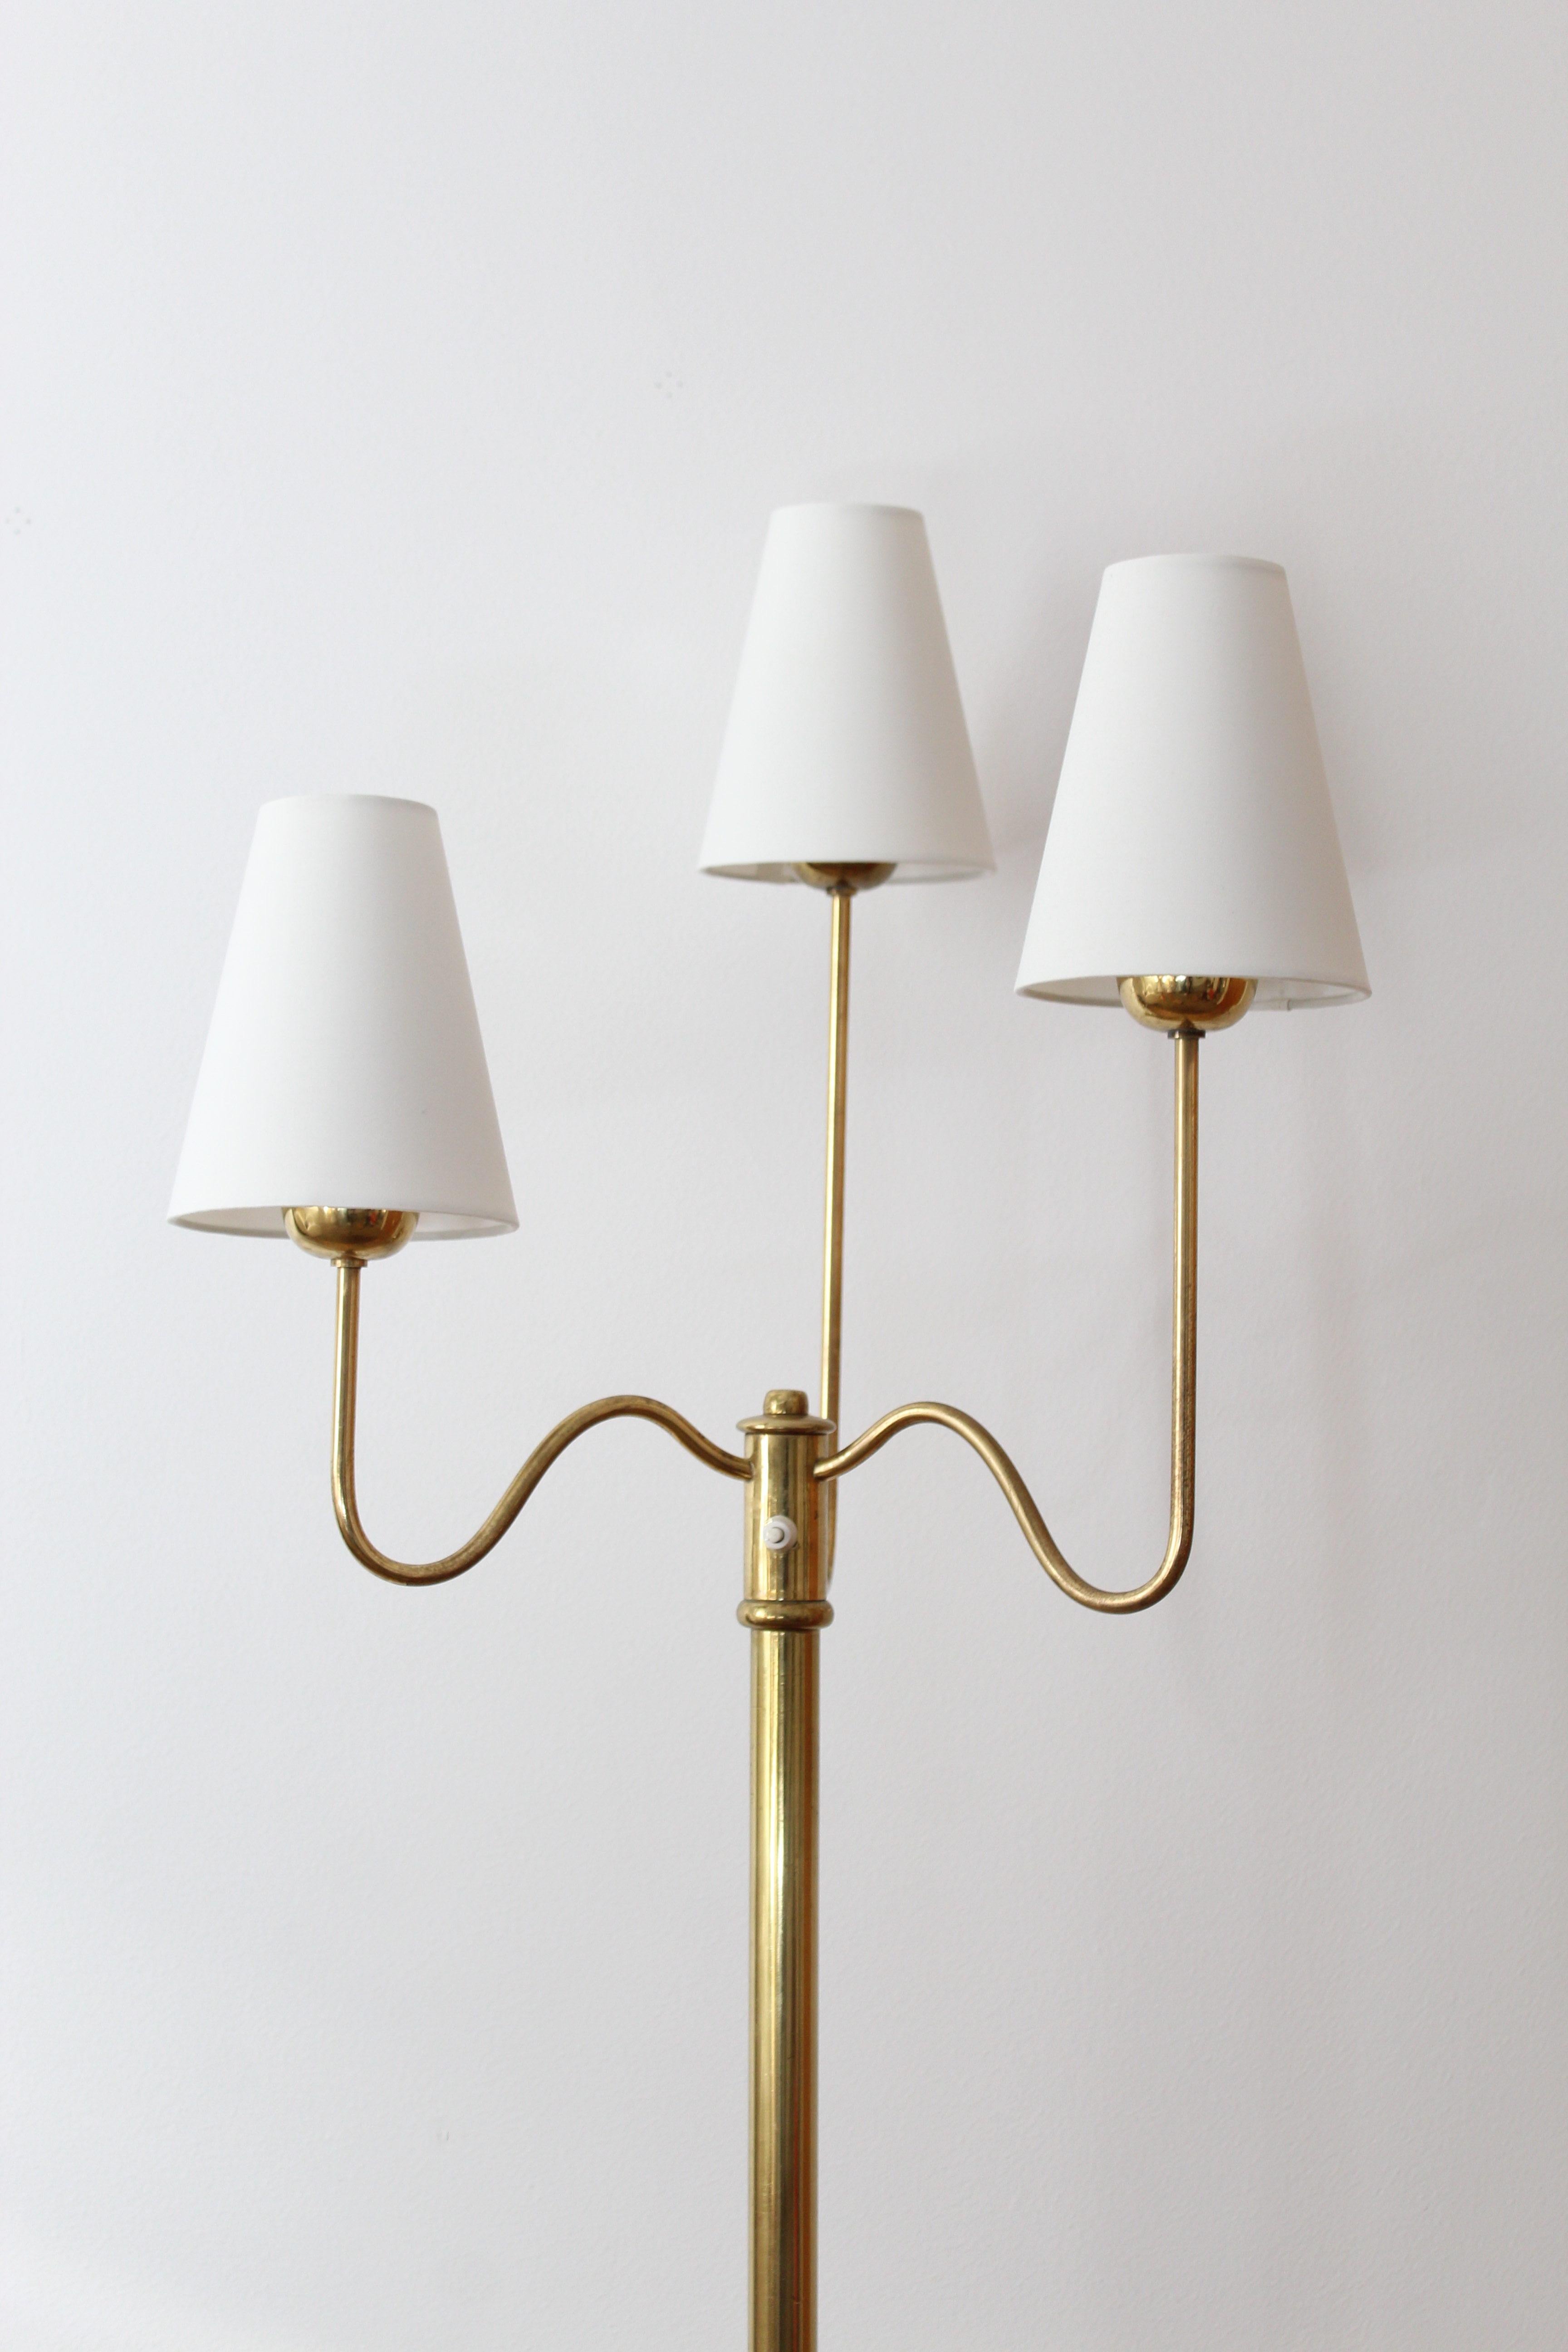 A table lamp, designed and produced in Sweden, 1940s. Features three organic arms. Brand new high-end silk lampshade. 

Other designers of the period include Paavo Tynell, Alvar Aalto, Josef Frank, and Lisa Johansson-Pape.